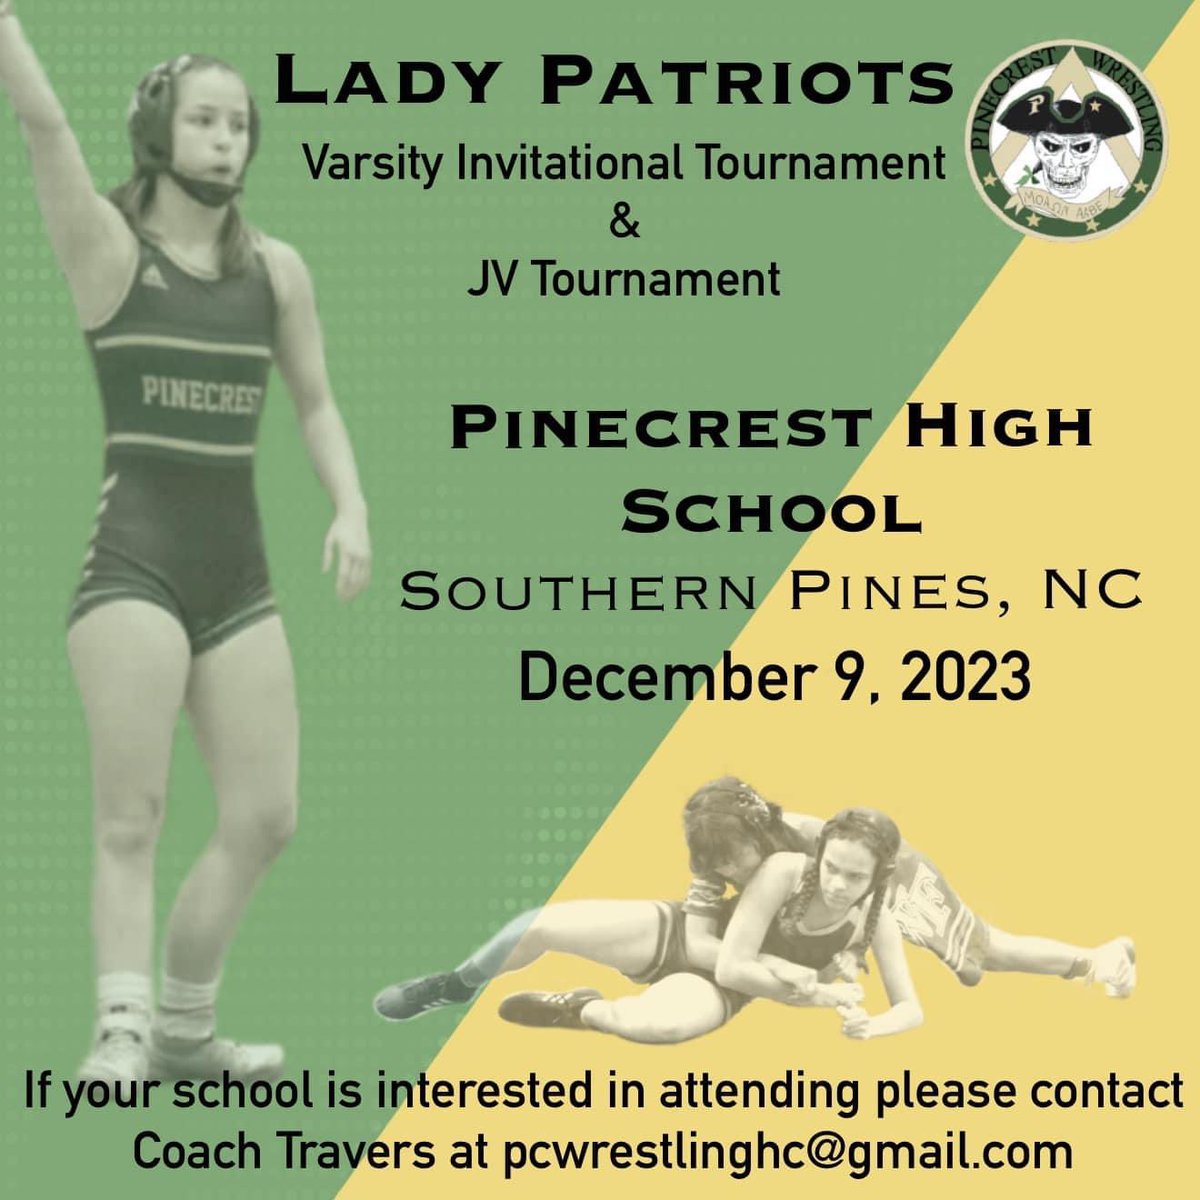 Calling any HS with women’s programs. Come get some! @ncwomenswrestle